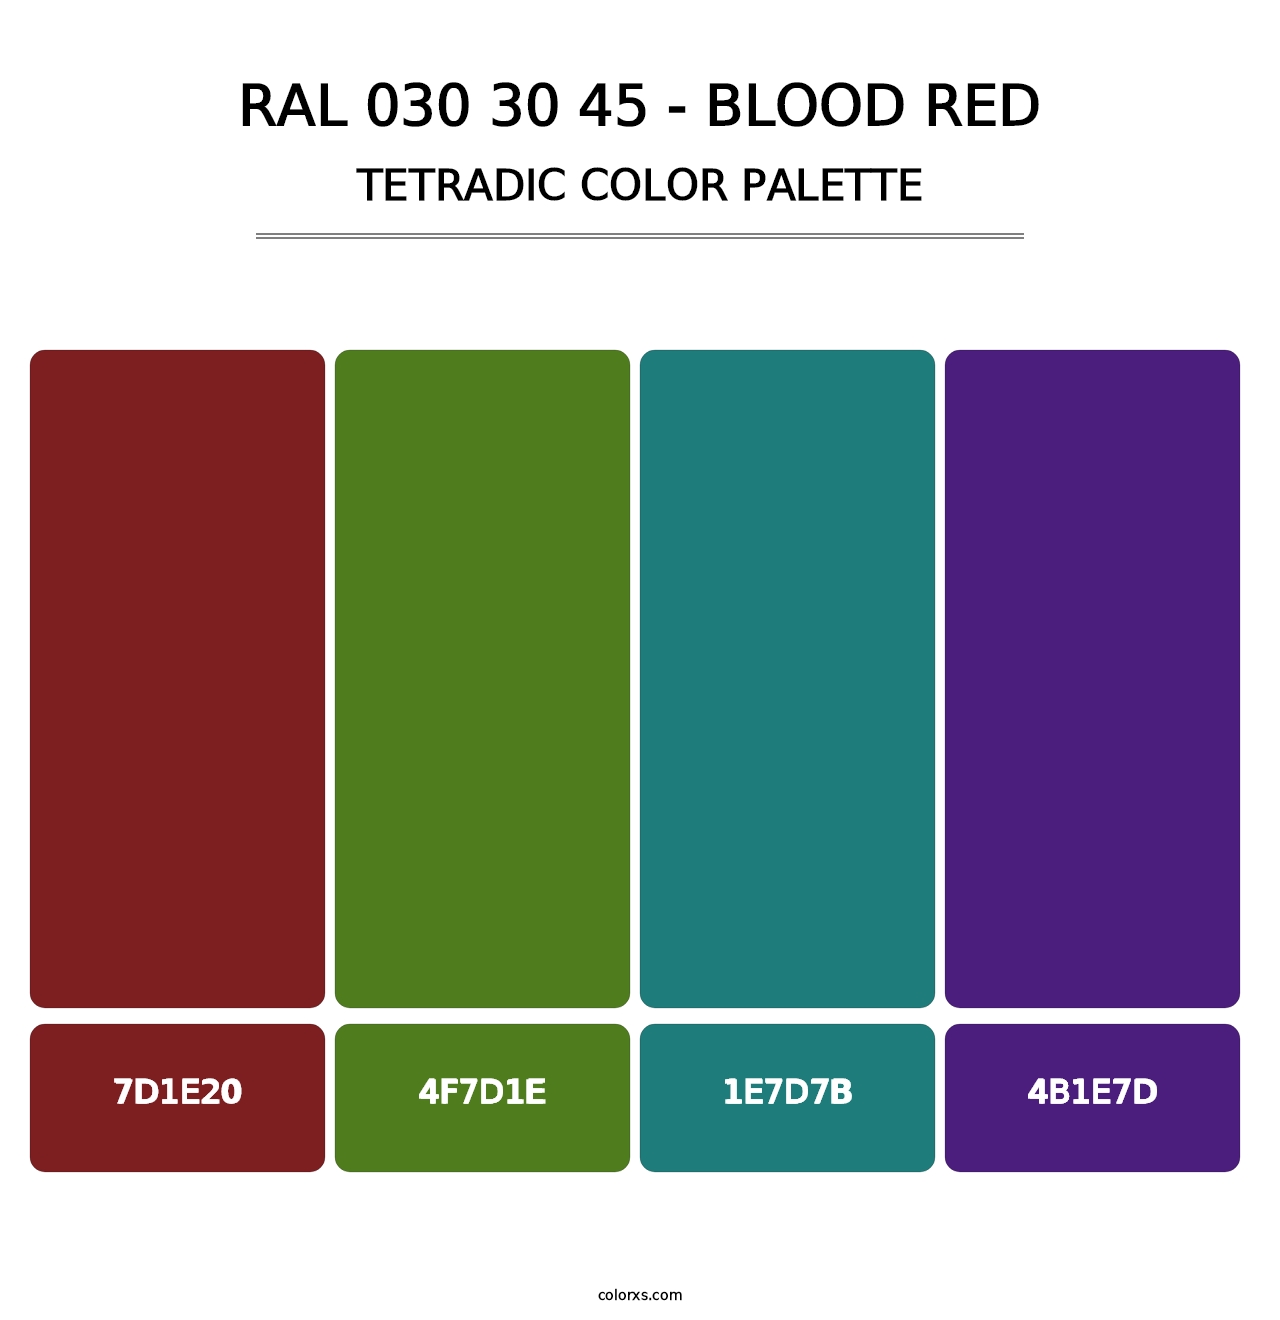 RAL 030 30 45 - Blood Red - Tetradic Color Palette